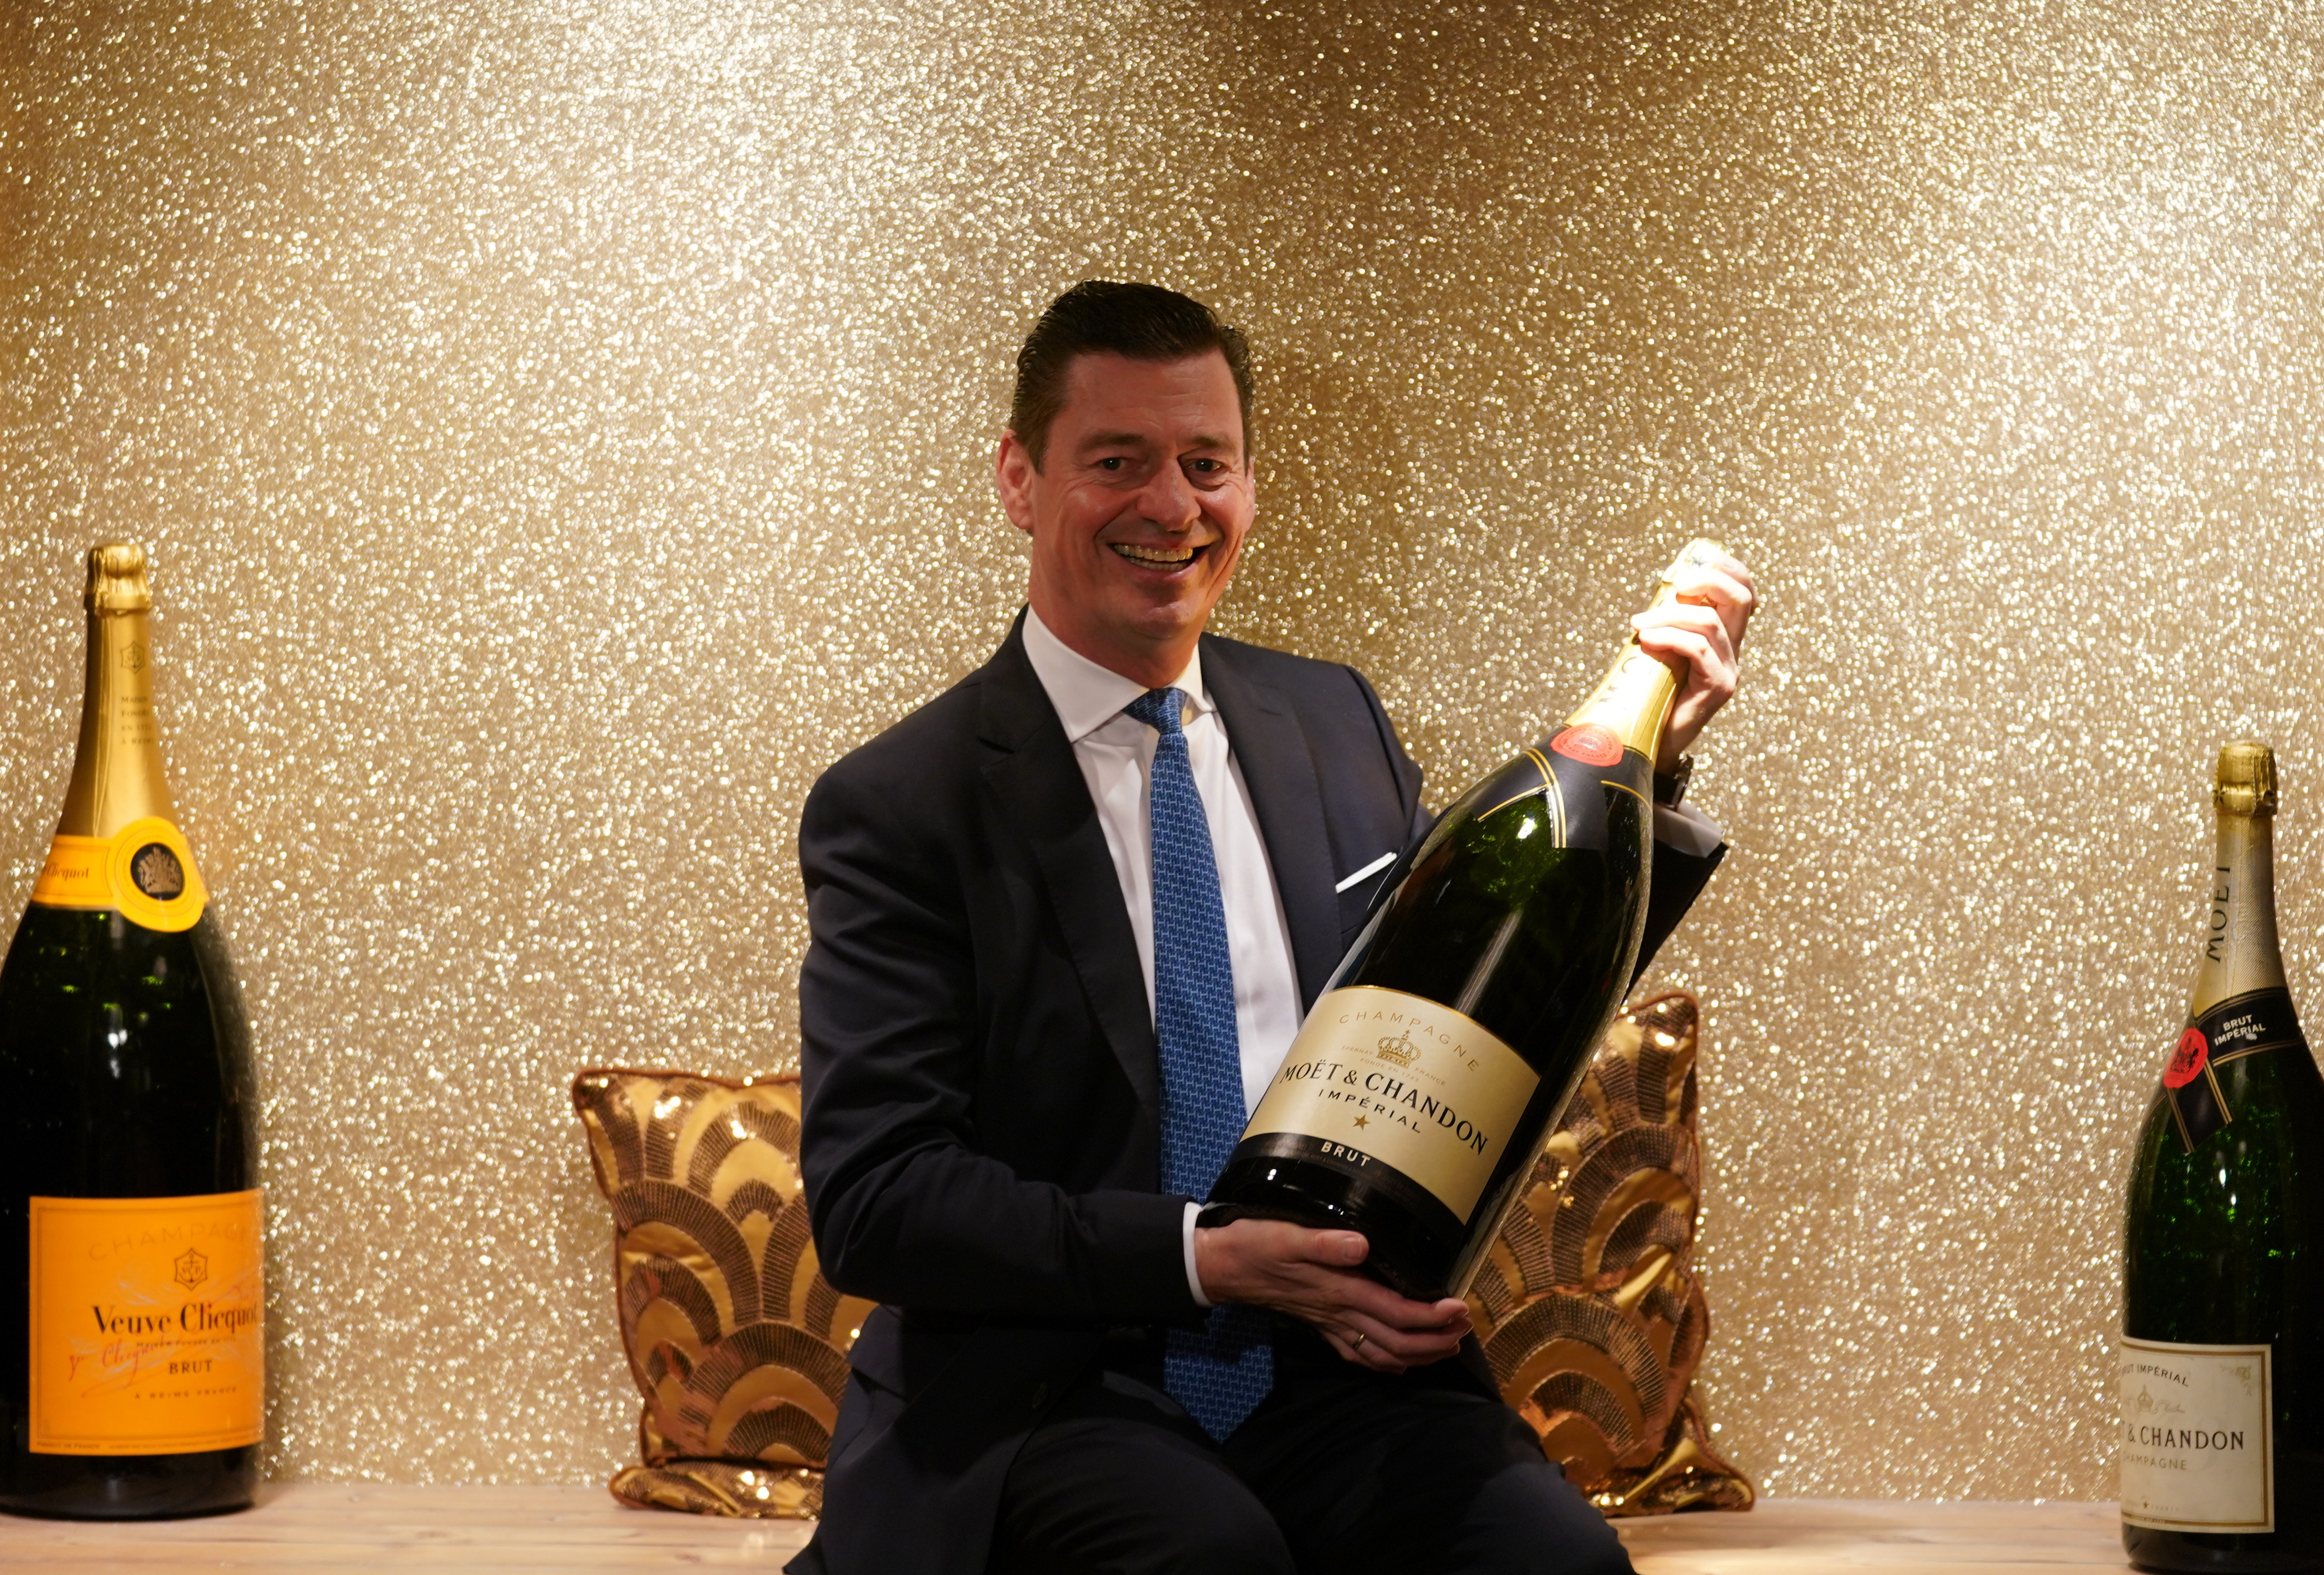 Raise a (big) glass! These are the 3 best jeroboams of champagne